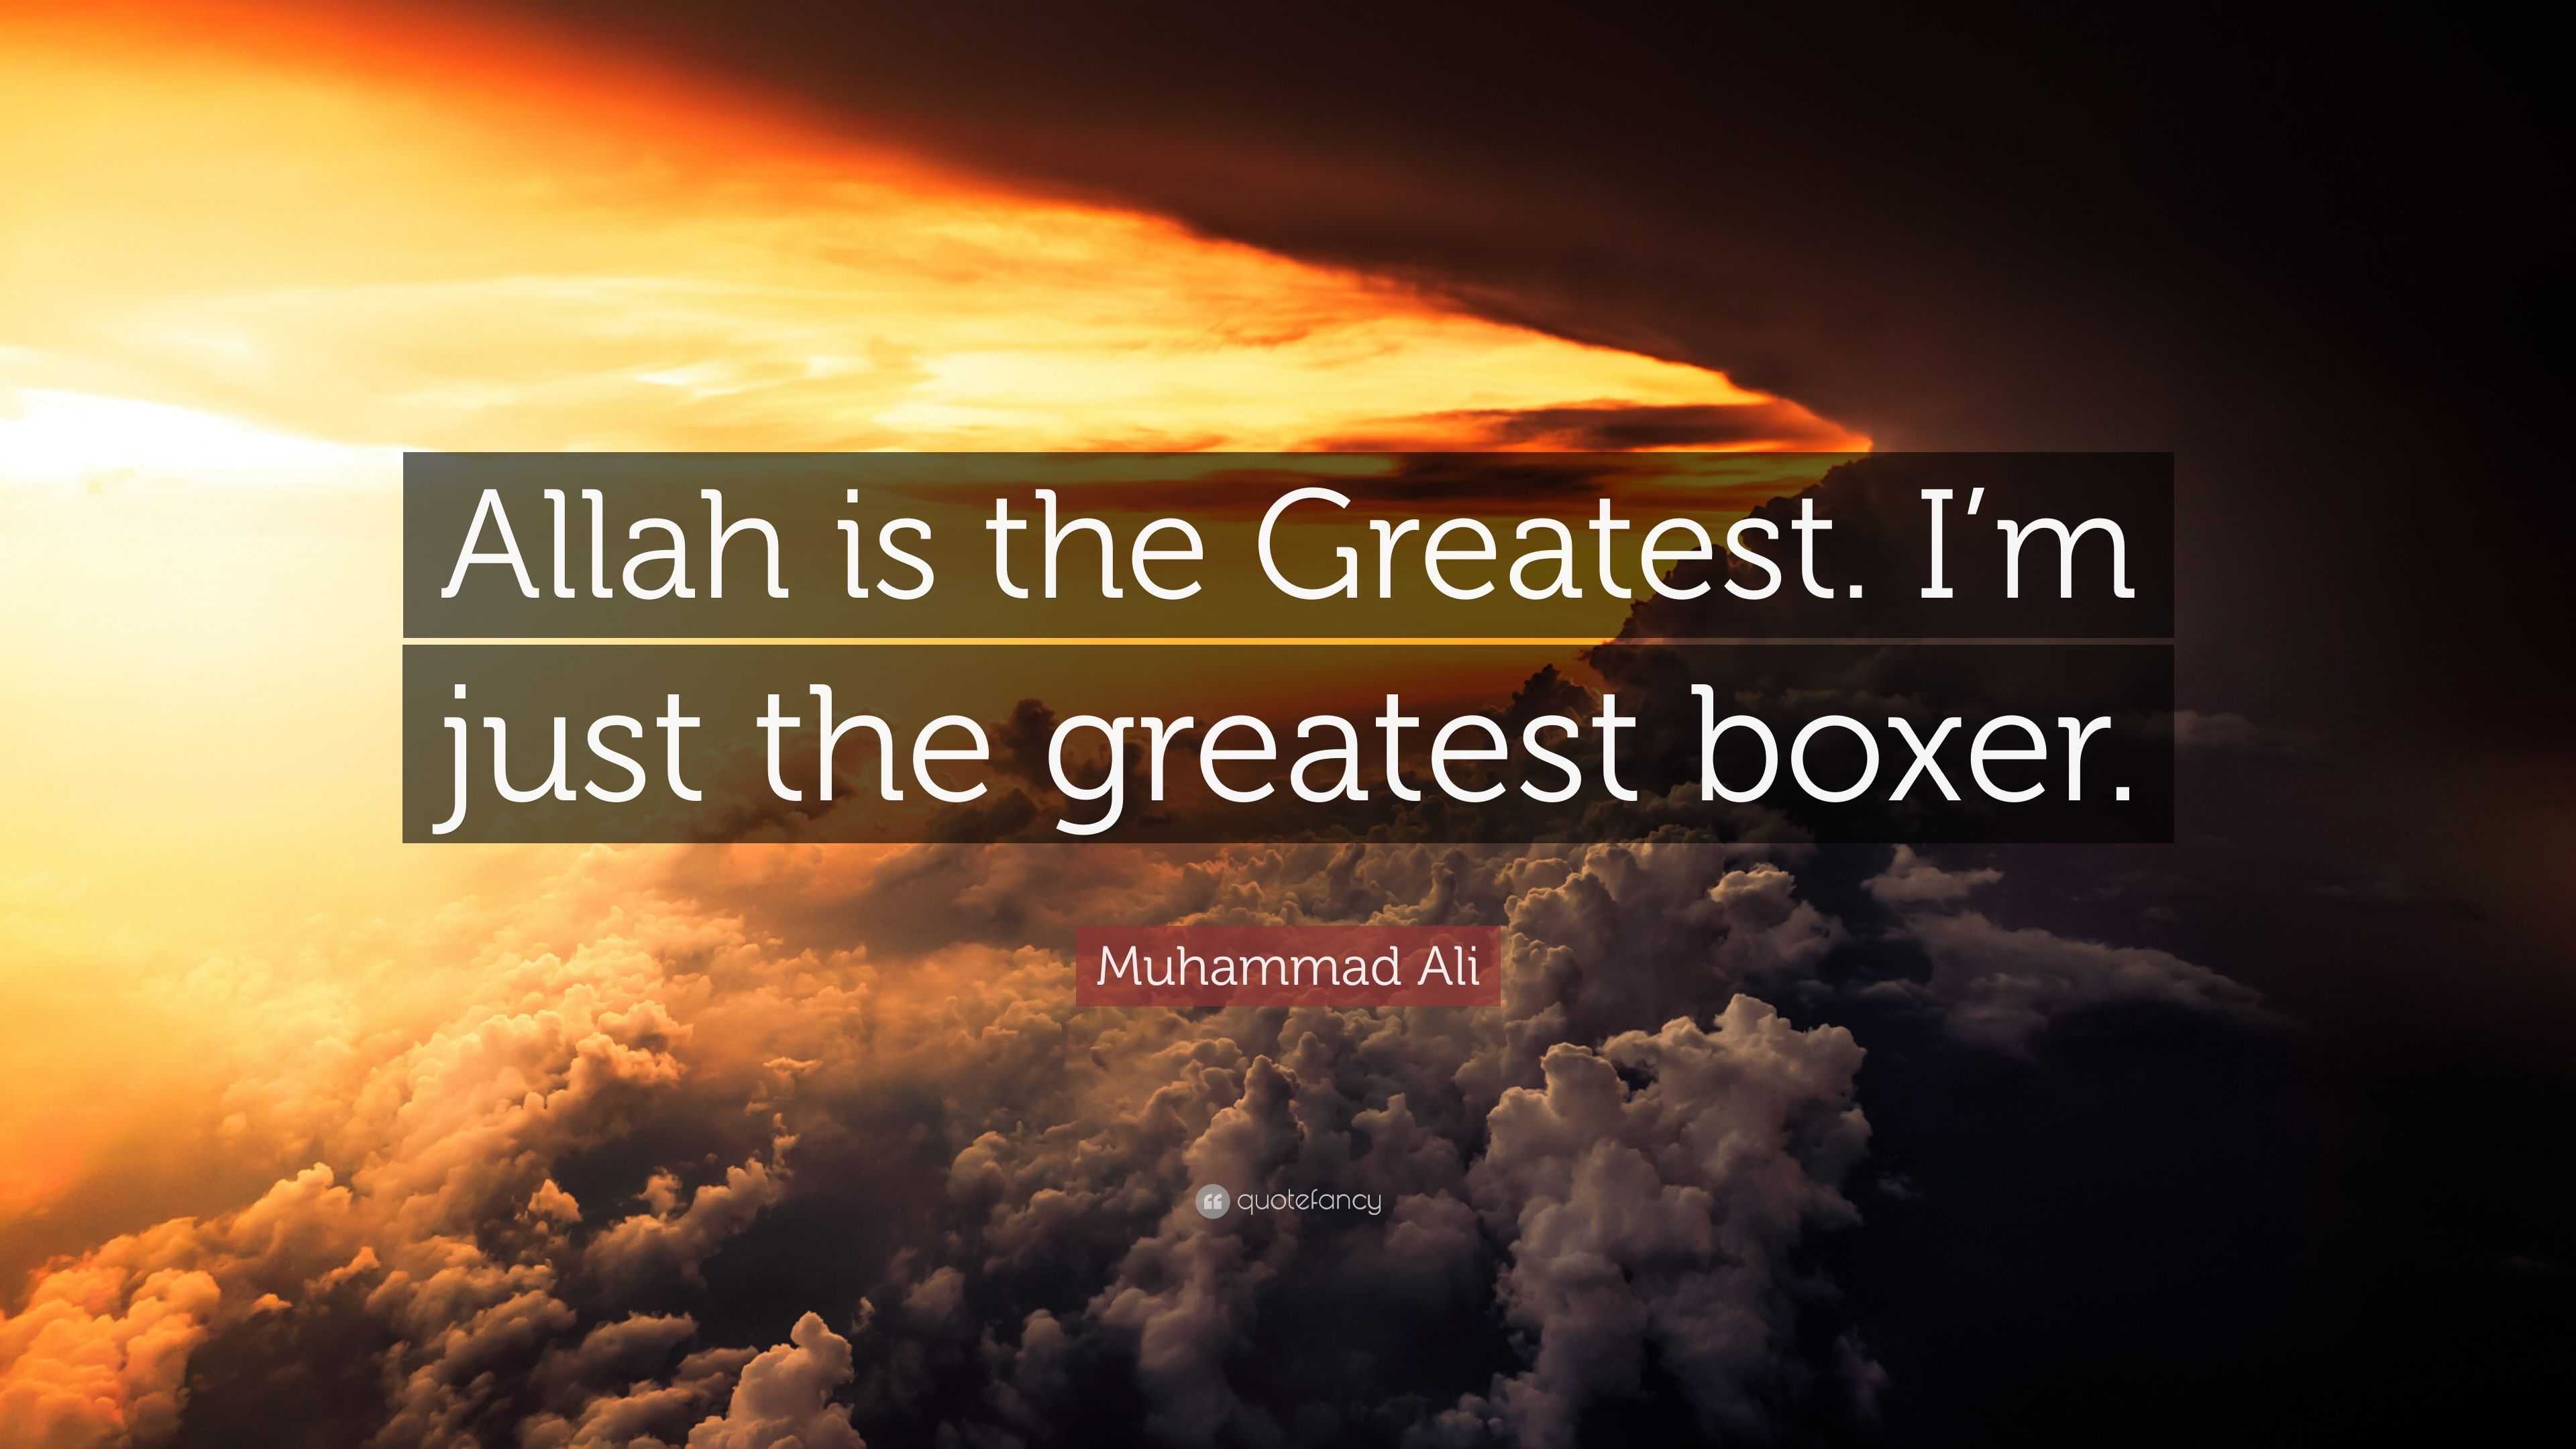 Muhammad Ali Quote: â€œAllah is the Greatest. Iâ€™m just the greatest boxer.â€